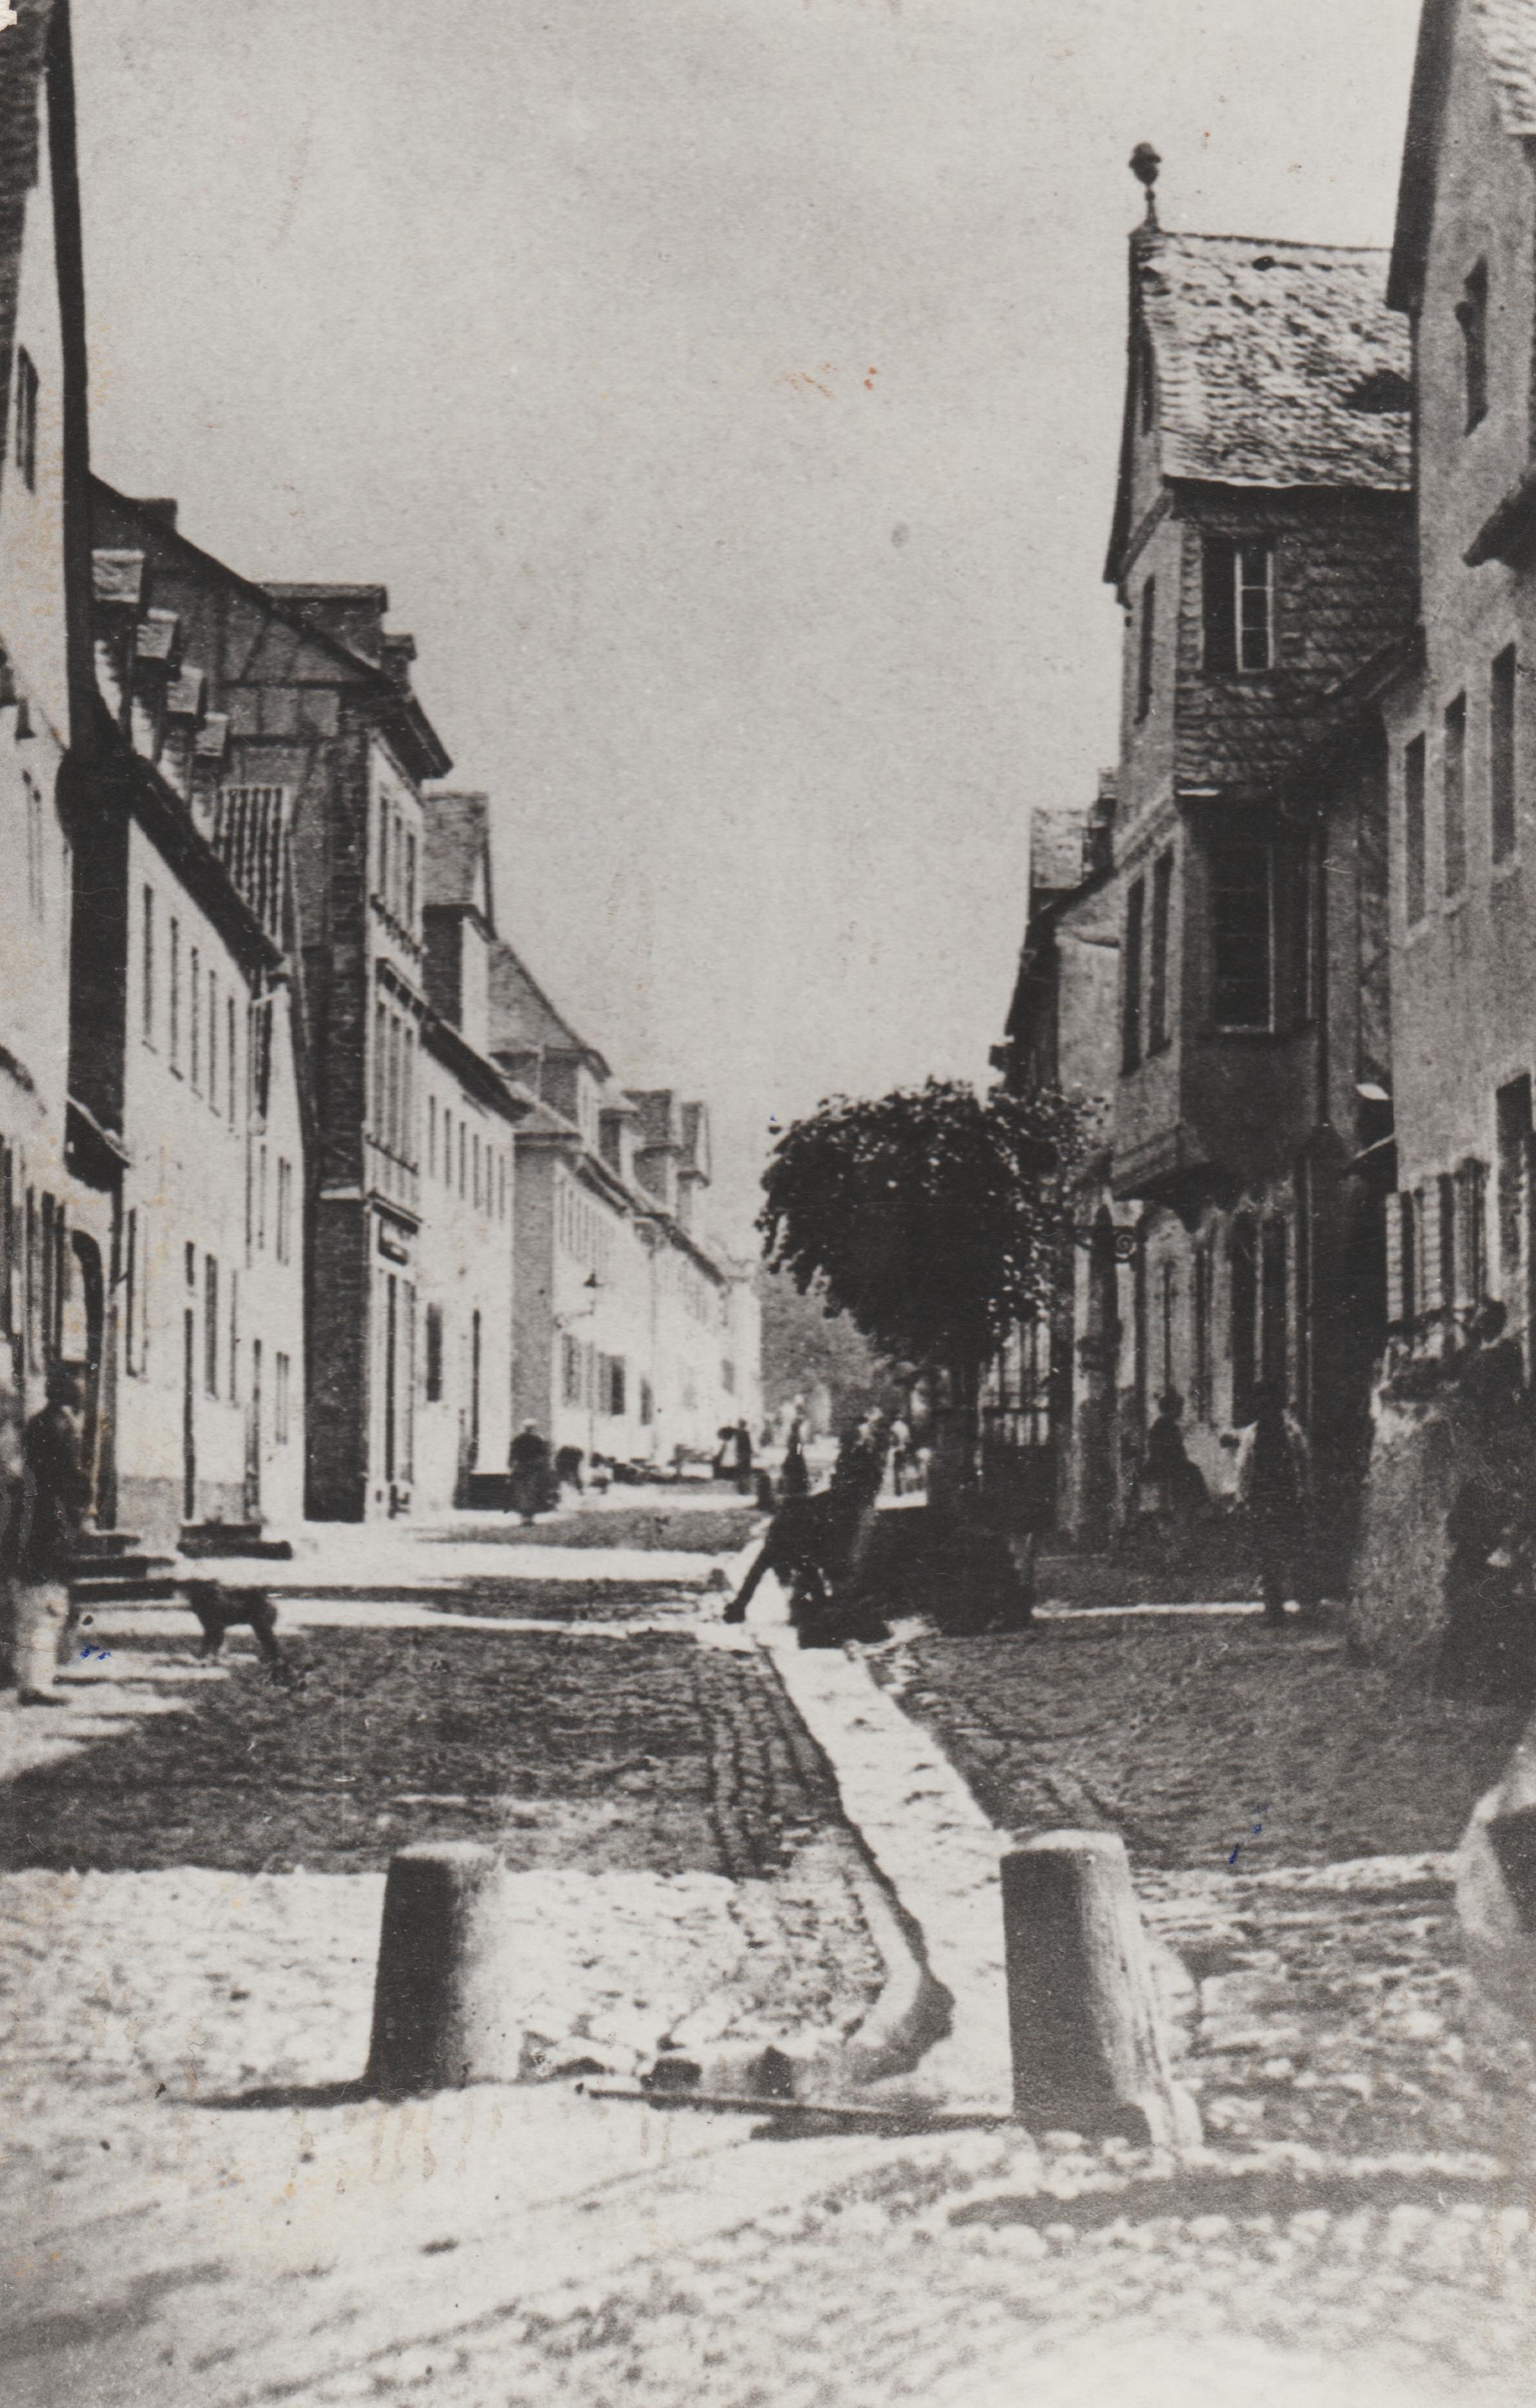 Mittlere Bachstrasse in Bendorf um 1880 (REM CC BY-NC-SA)